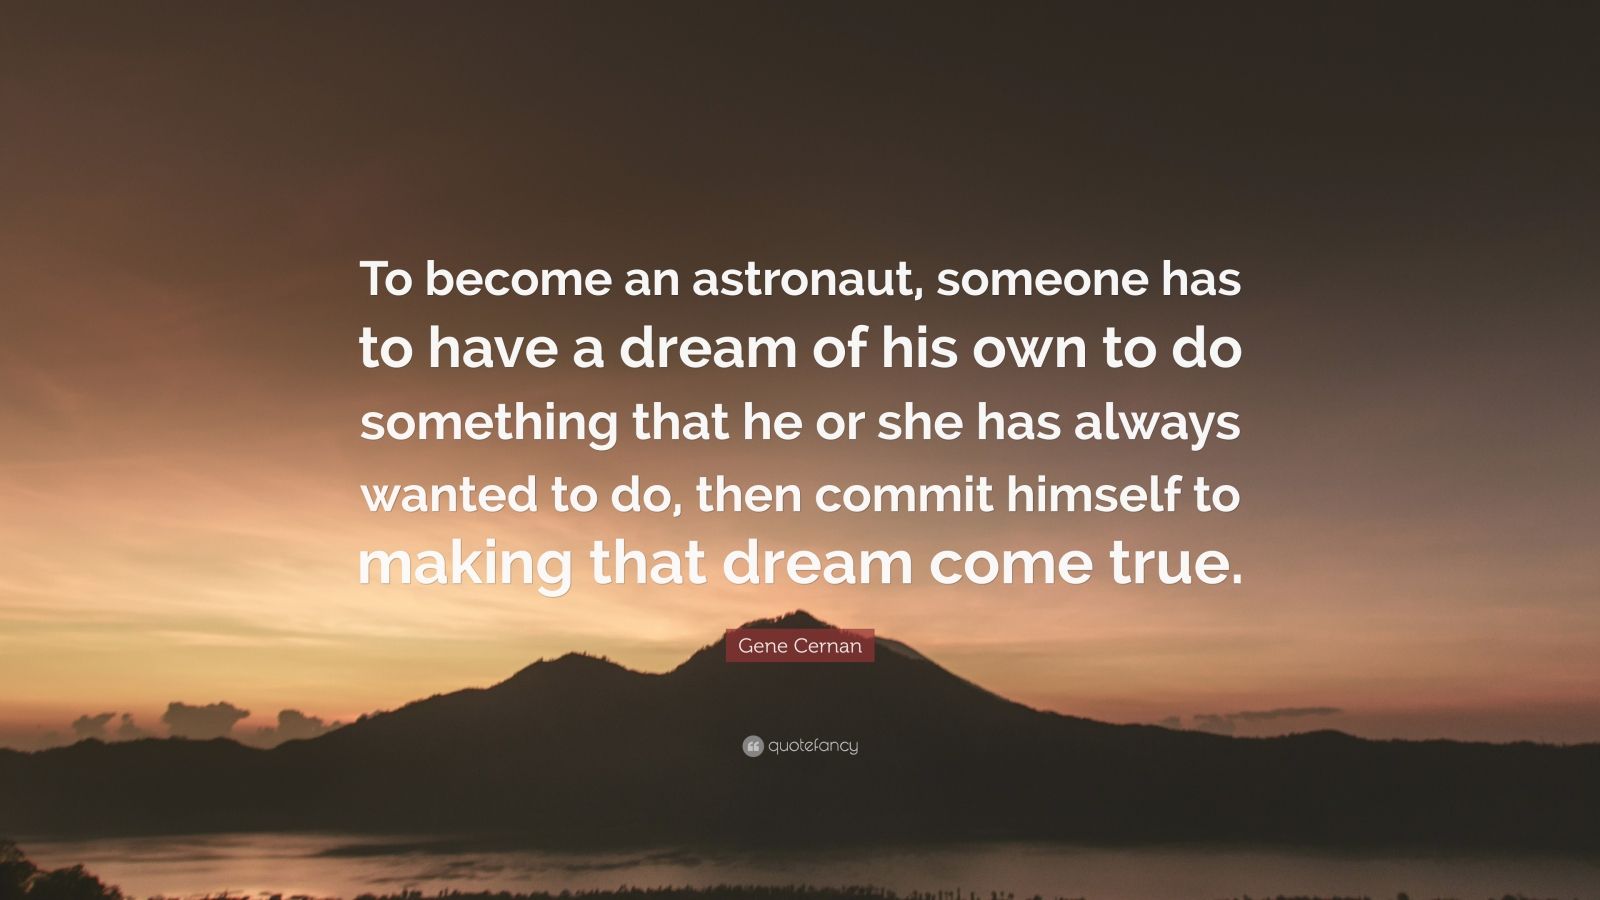 Gene Cernan Quote: “To become an astronaut, someone has to have a dream